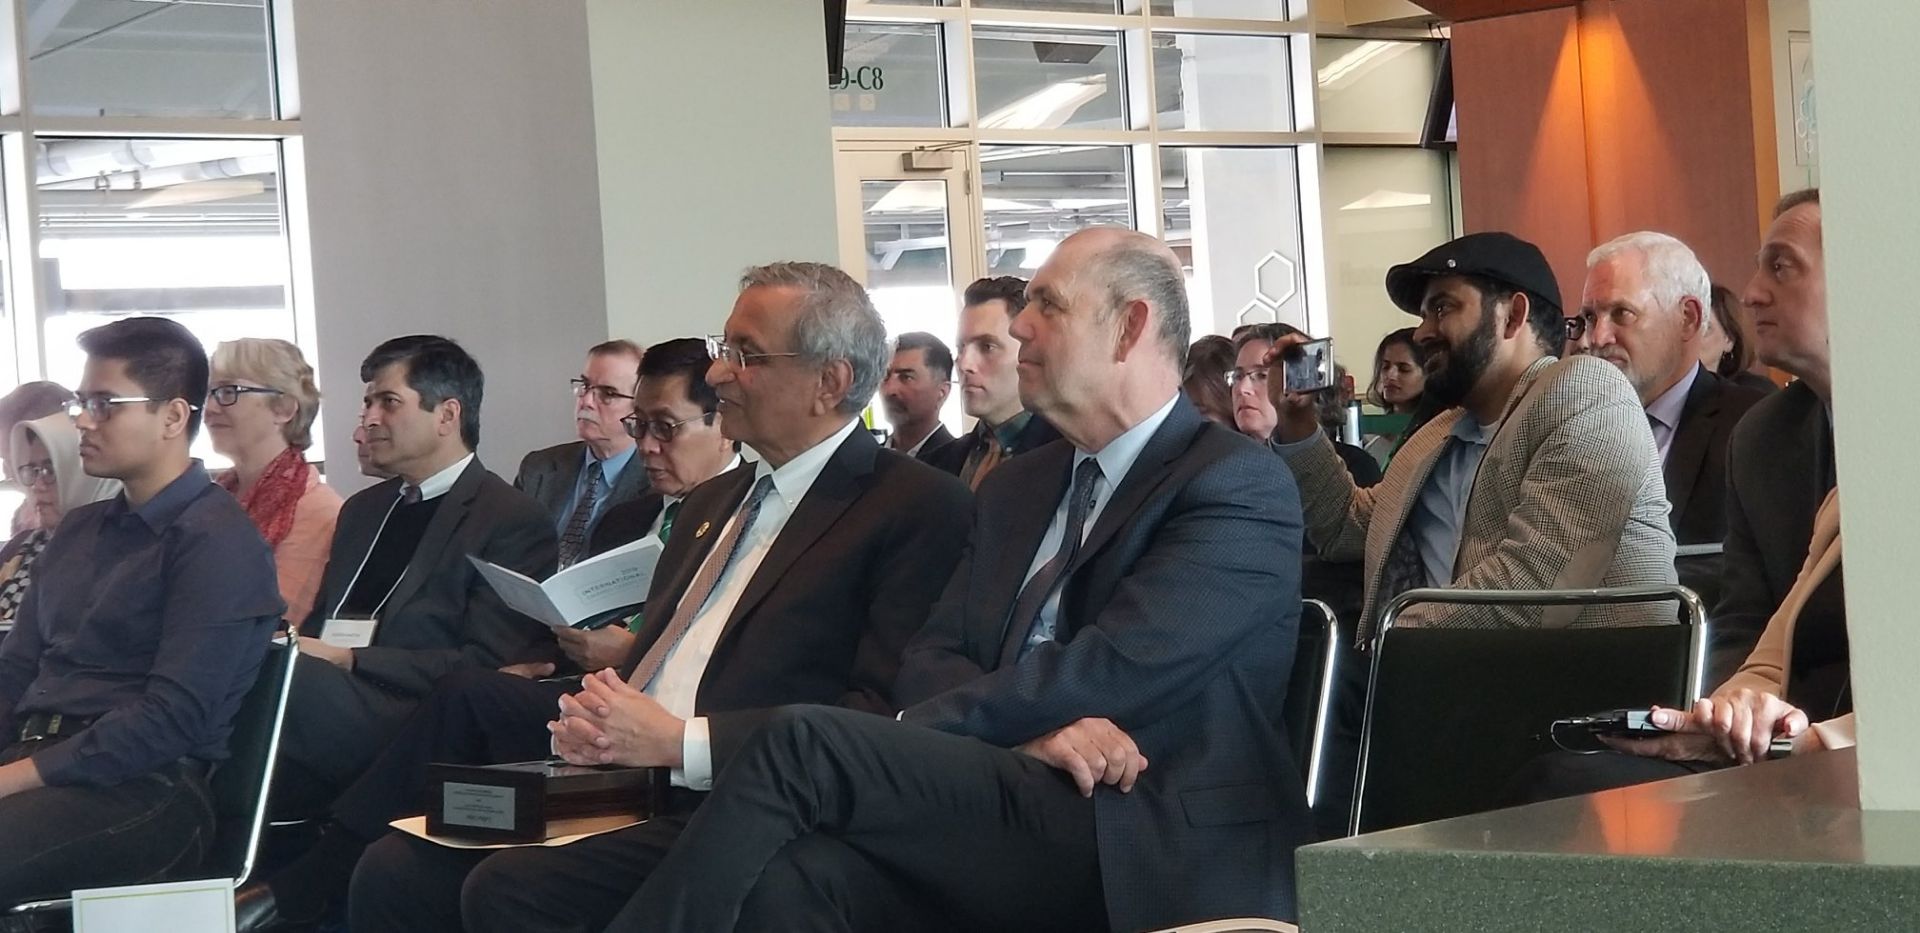 Some members of the audience listening to the students present. Pictured sitting in the audience: Dean Hanson and Satish Udpa, Acting President, MSU